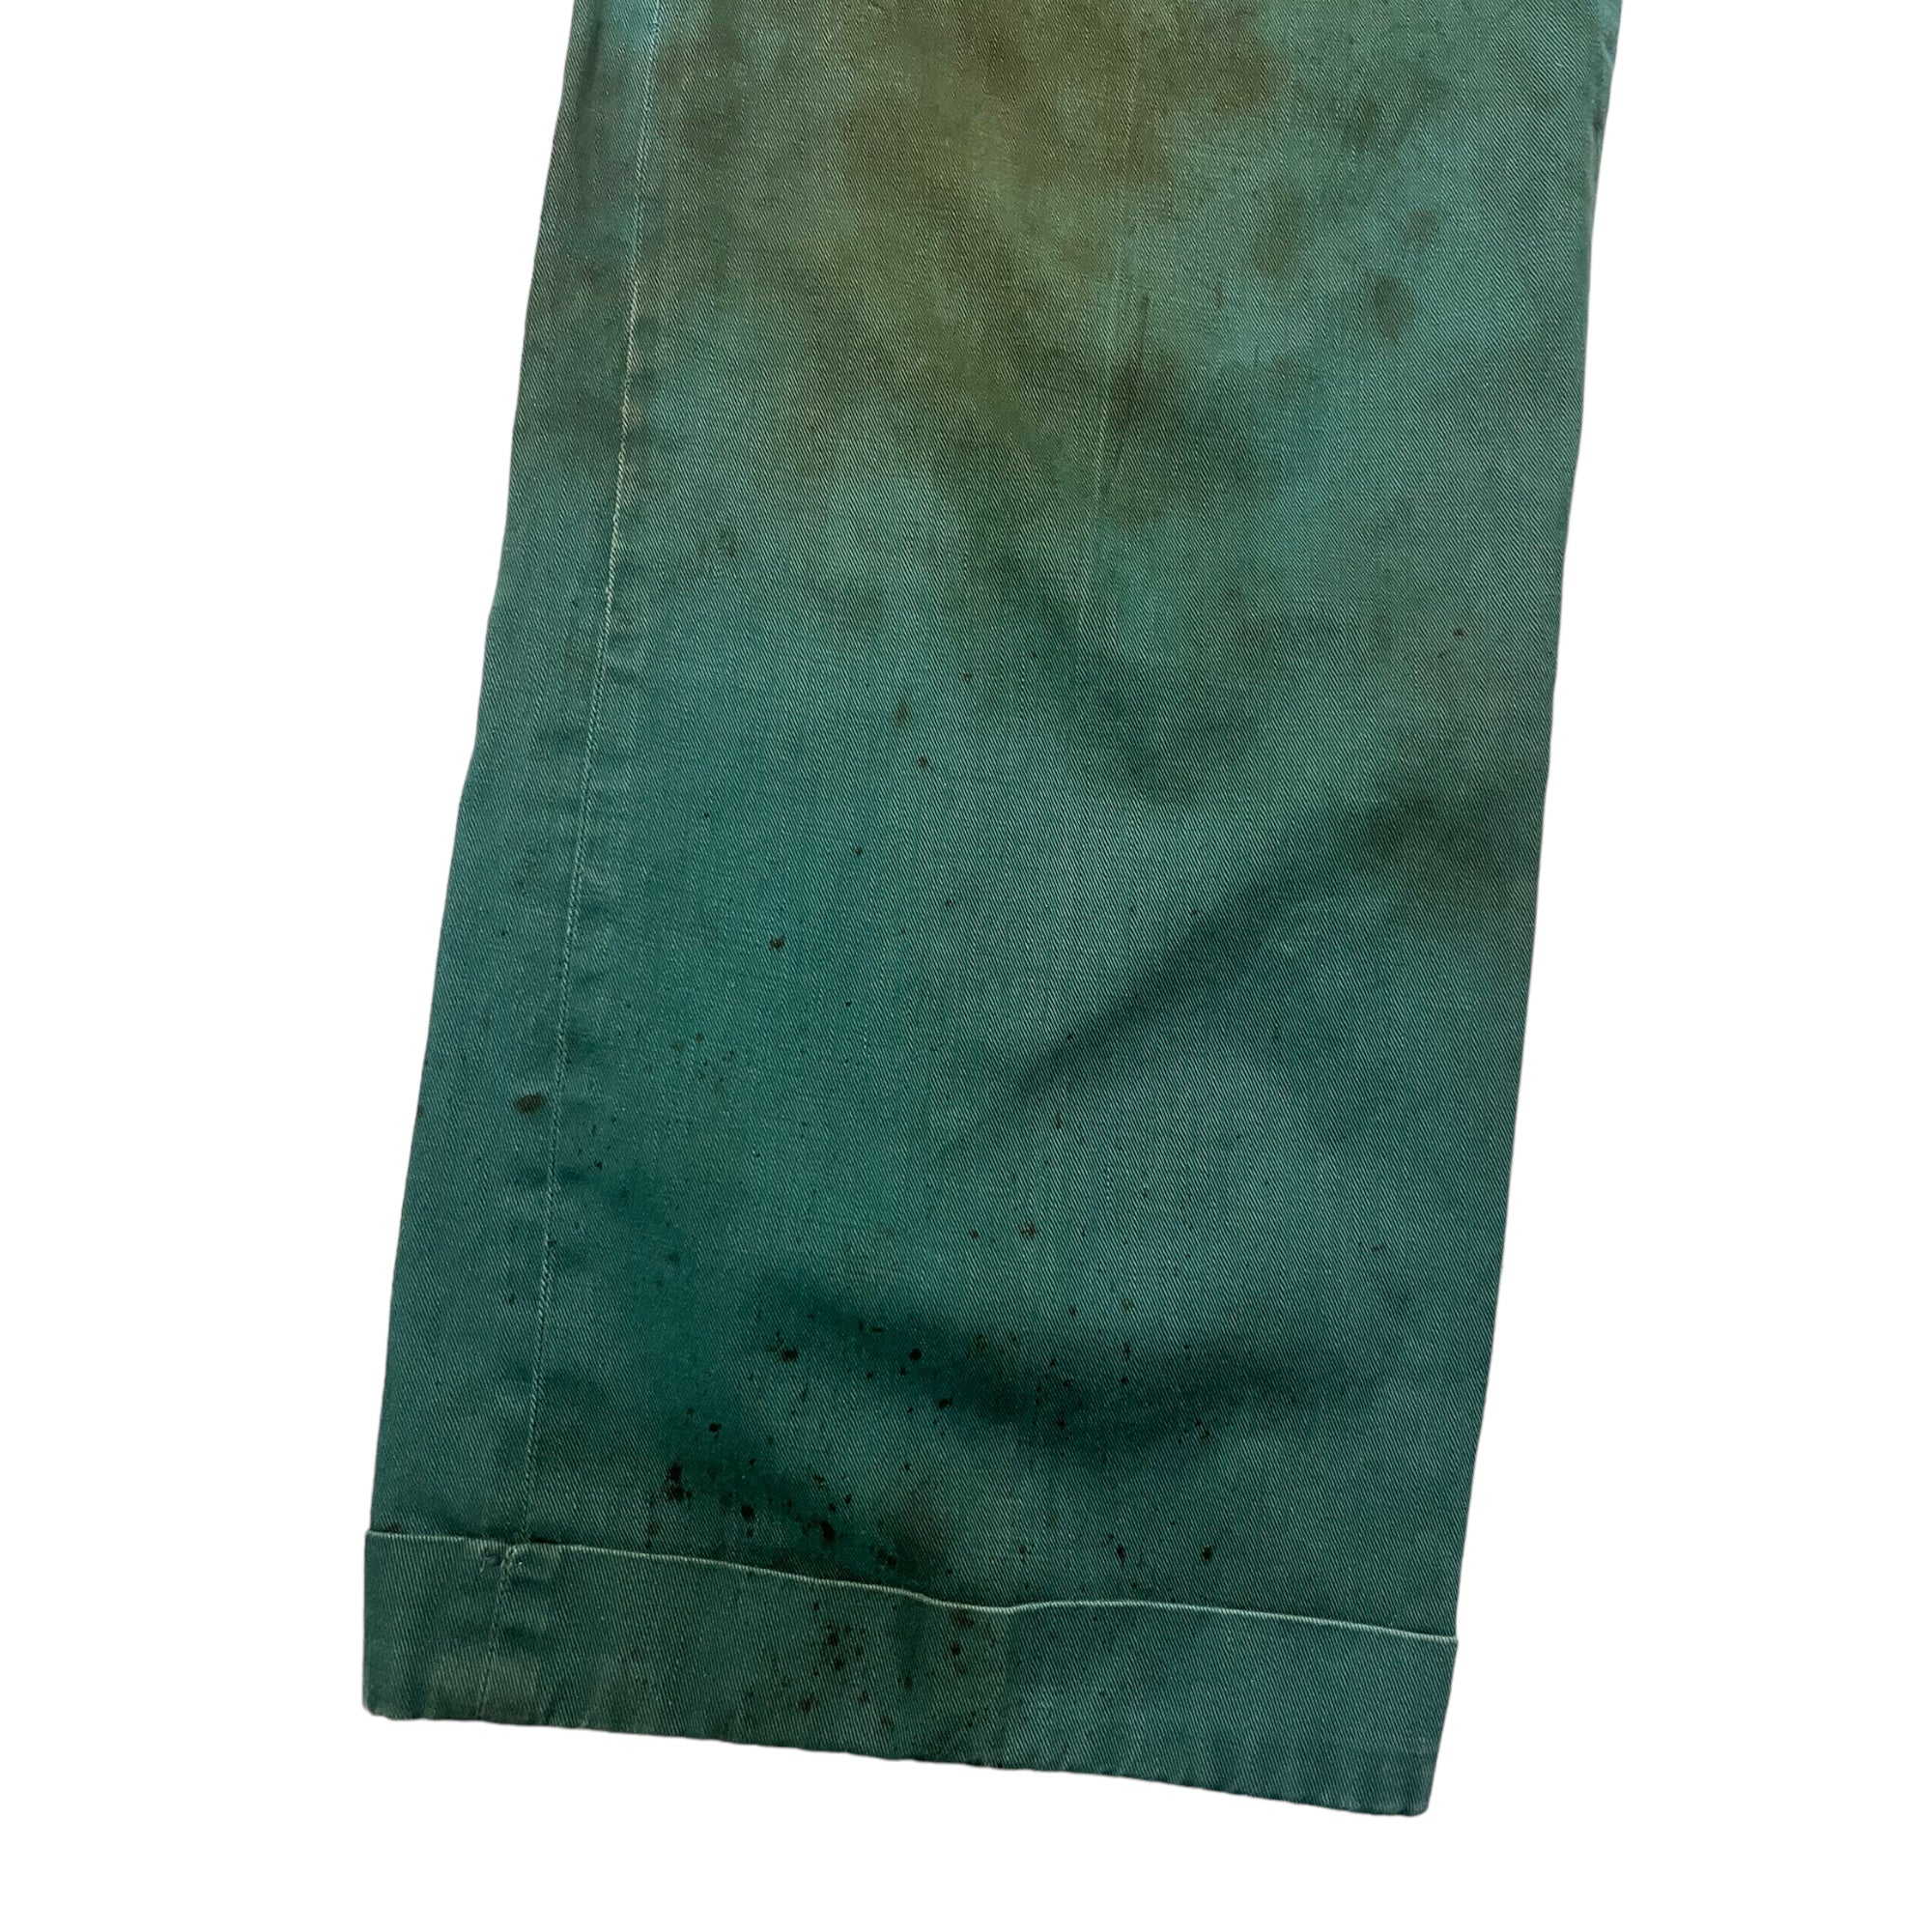 1950s Distressed Hercules Work Trousers - Faded Green - 36x32